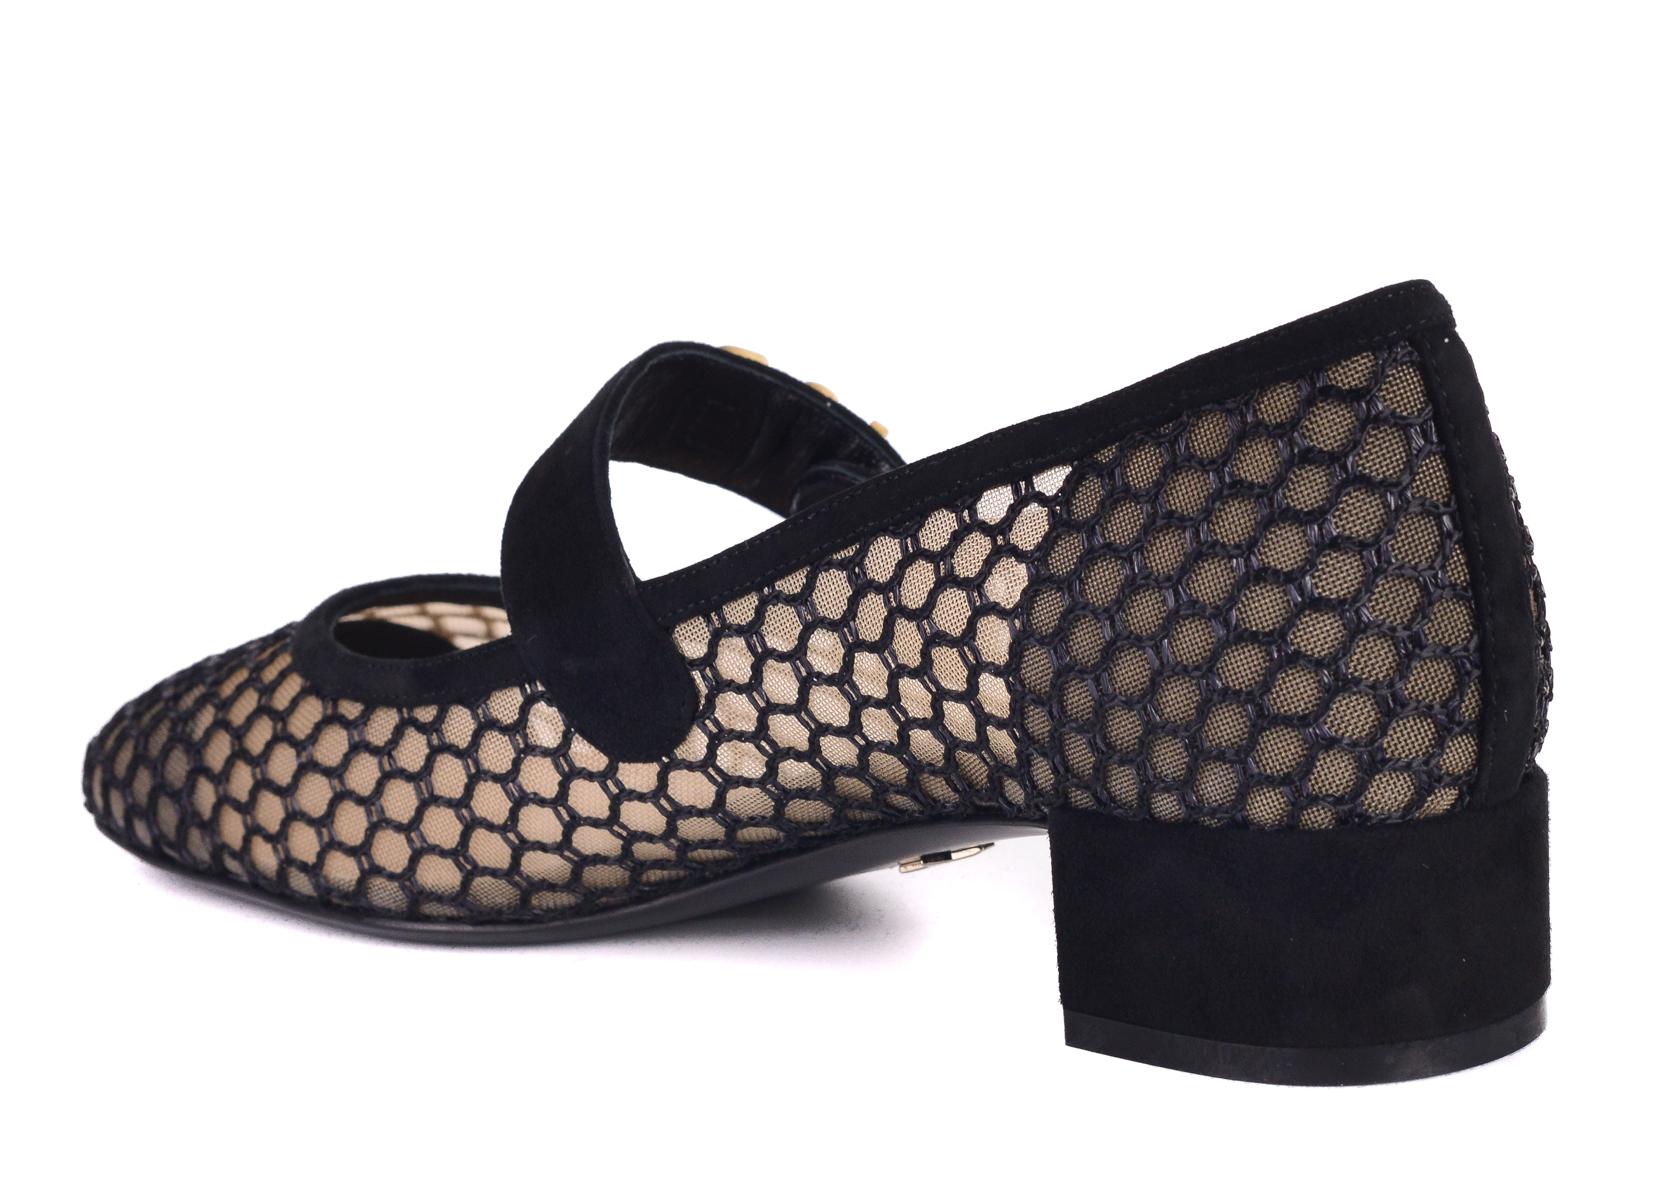 Dior Women's Black Baby-D Suede Mesh Cap Toe Pumps In New Condition For Sale In Brooklyn, NY